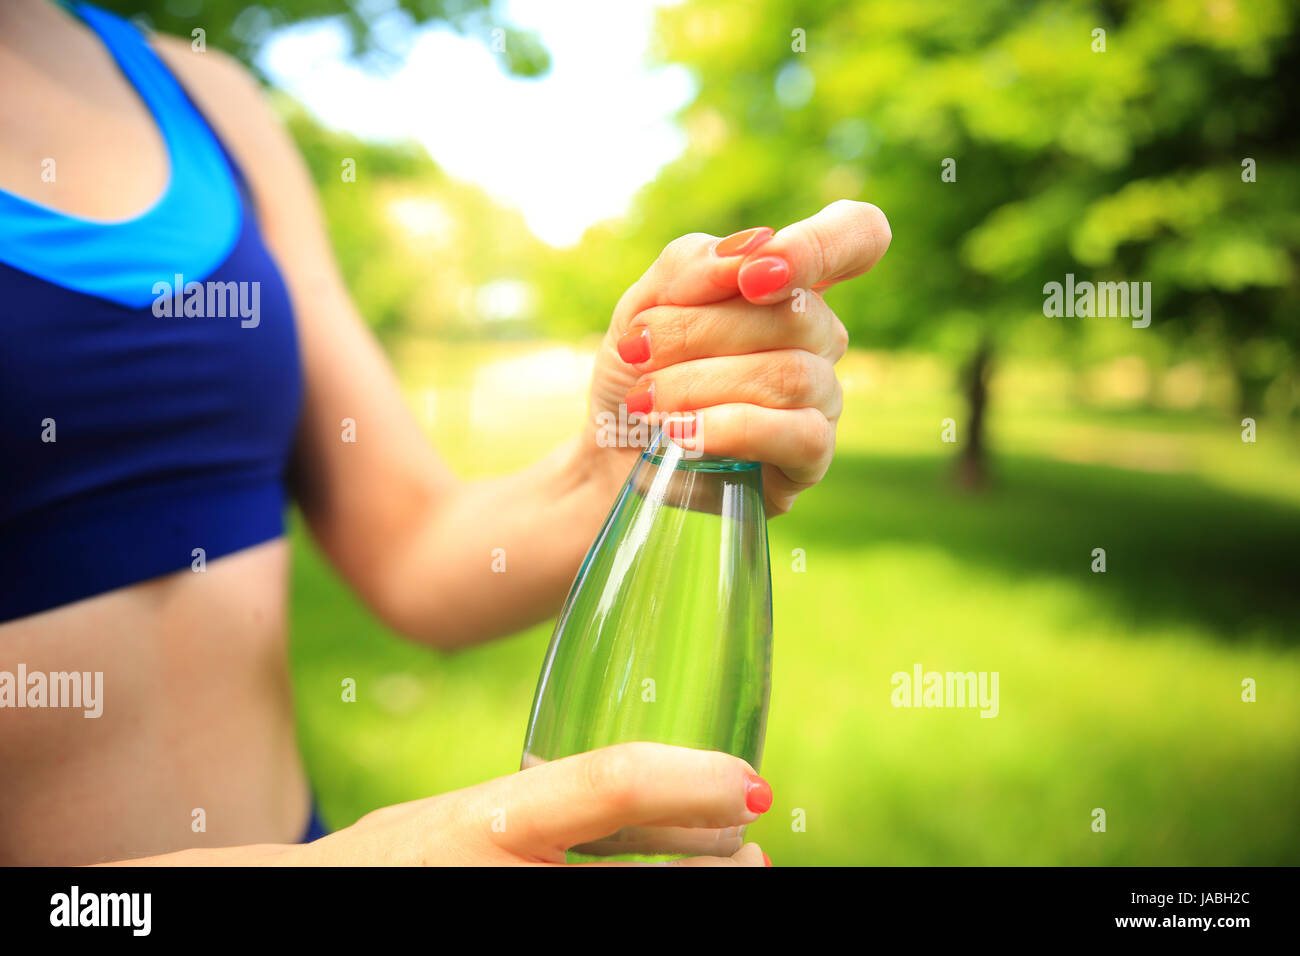 Healthy lifestyle theme. Opening bottle of water close-up. Girl opens bottle of water after fitness outdoors. Stock Photo